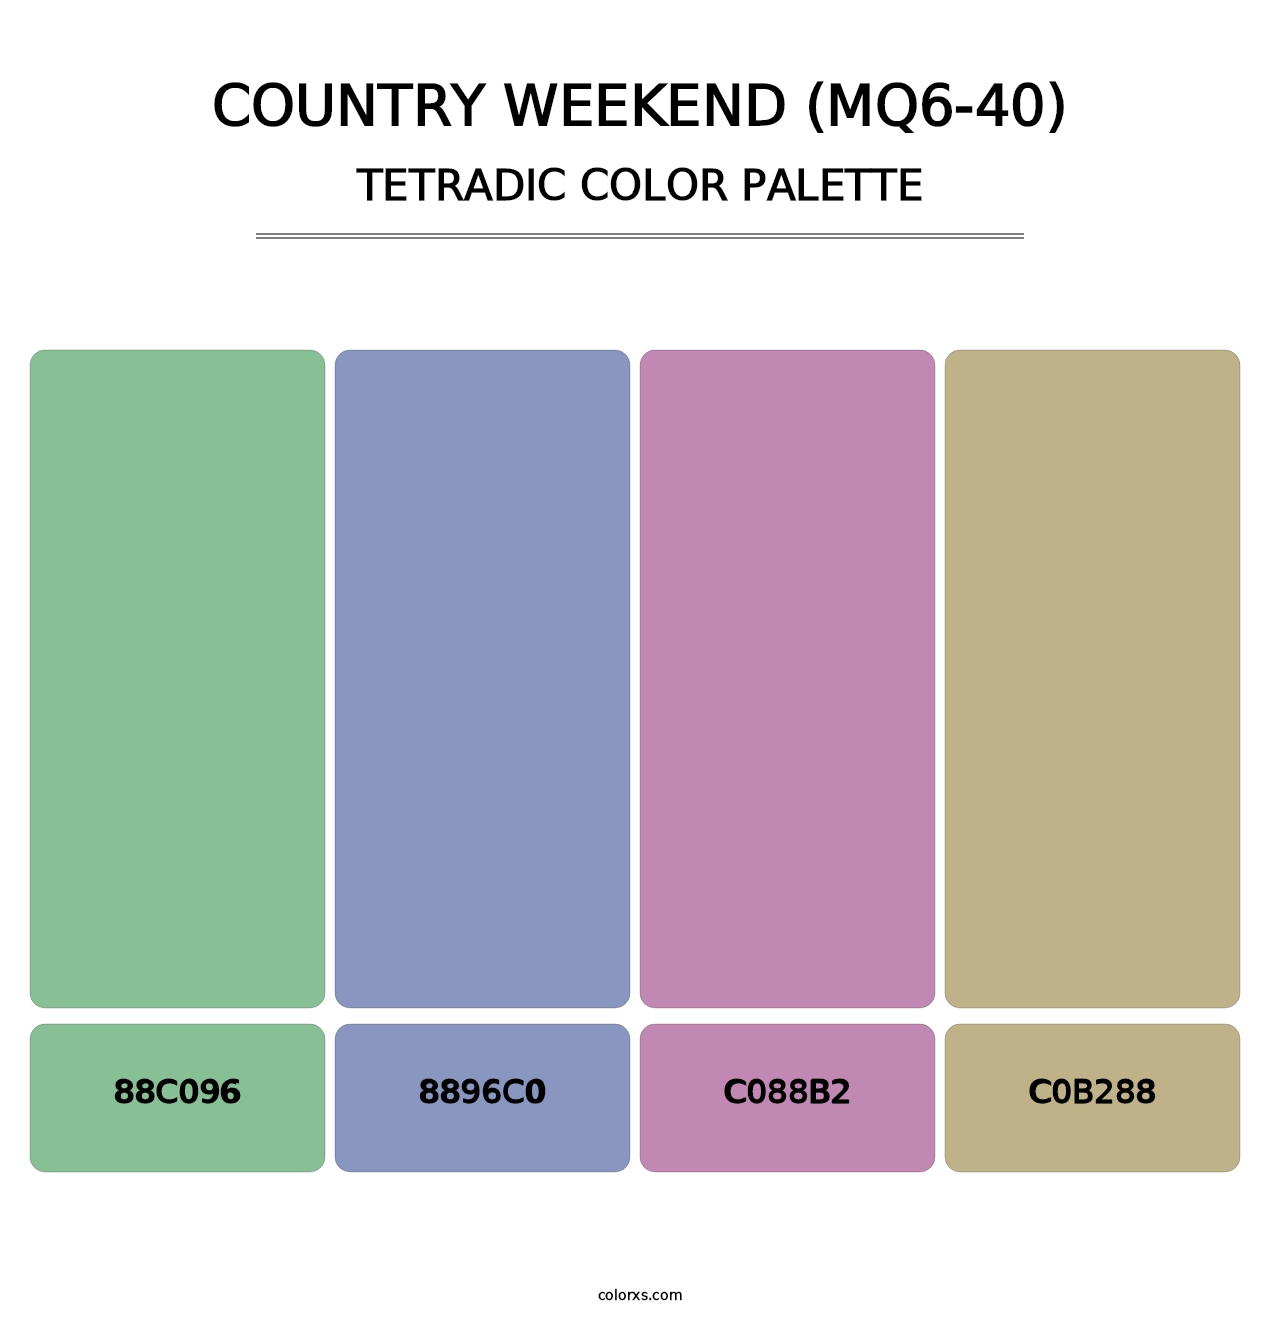 Country Weekend (MQ6-40) - Tetradic Color Palette